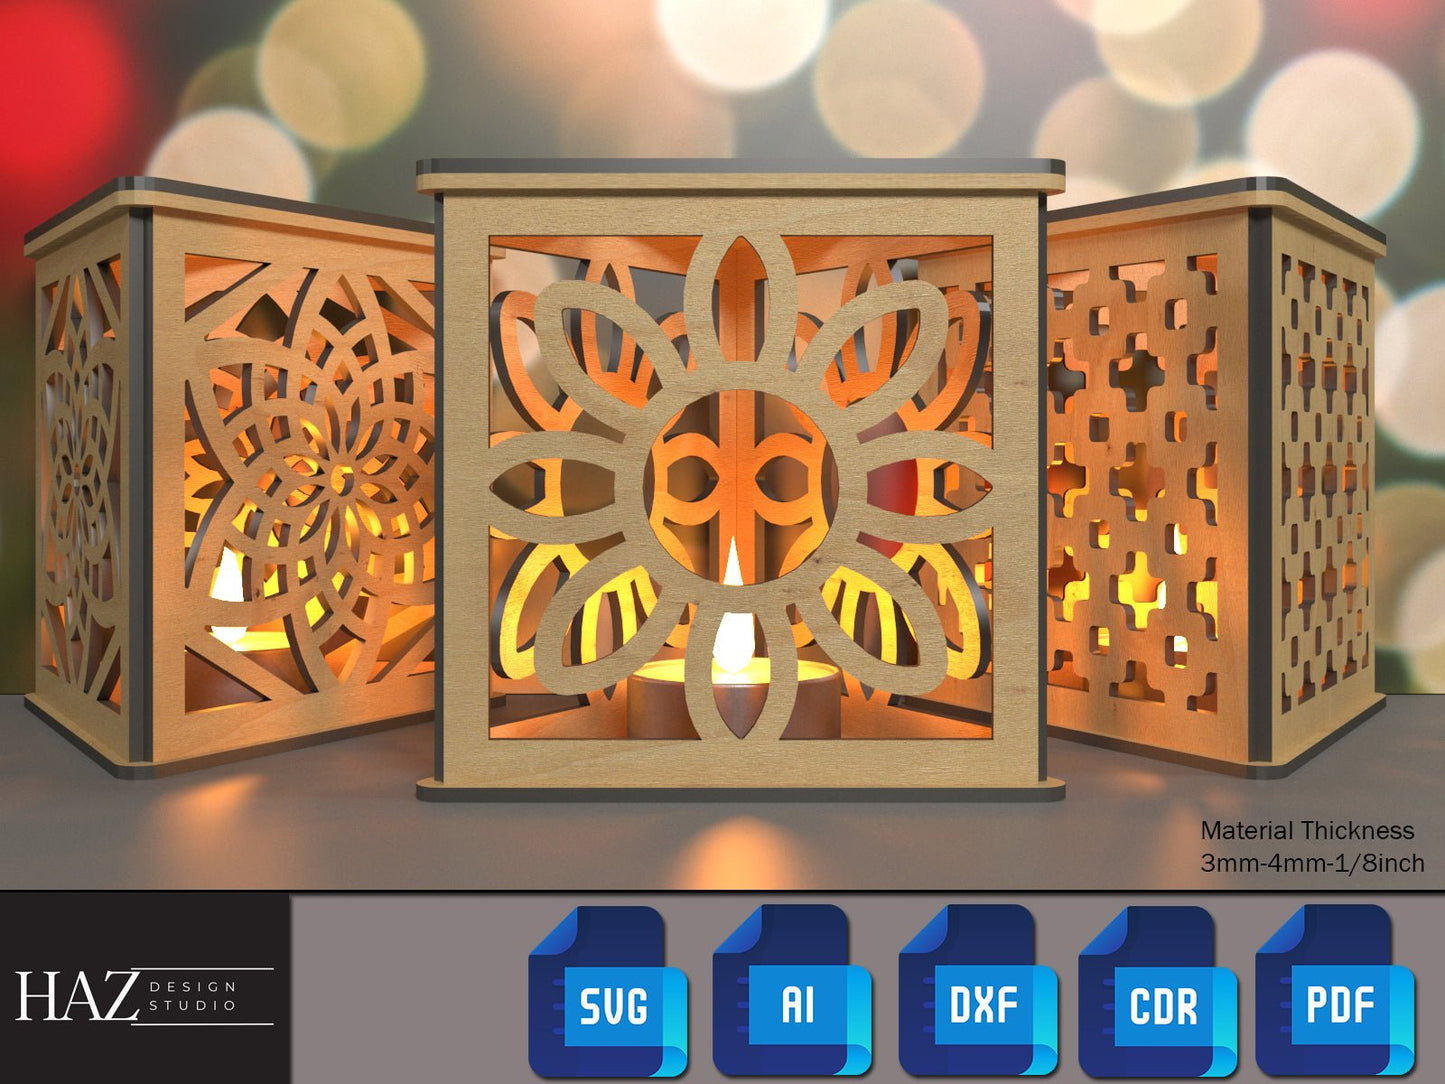 Triangle Table Lamps / Floor Light Boxes / Glowforge Candle Holders / Tealight Christmas Decor / Lantern Noel Gift SVG DXF CDR Ai PDf 175